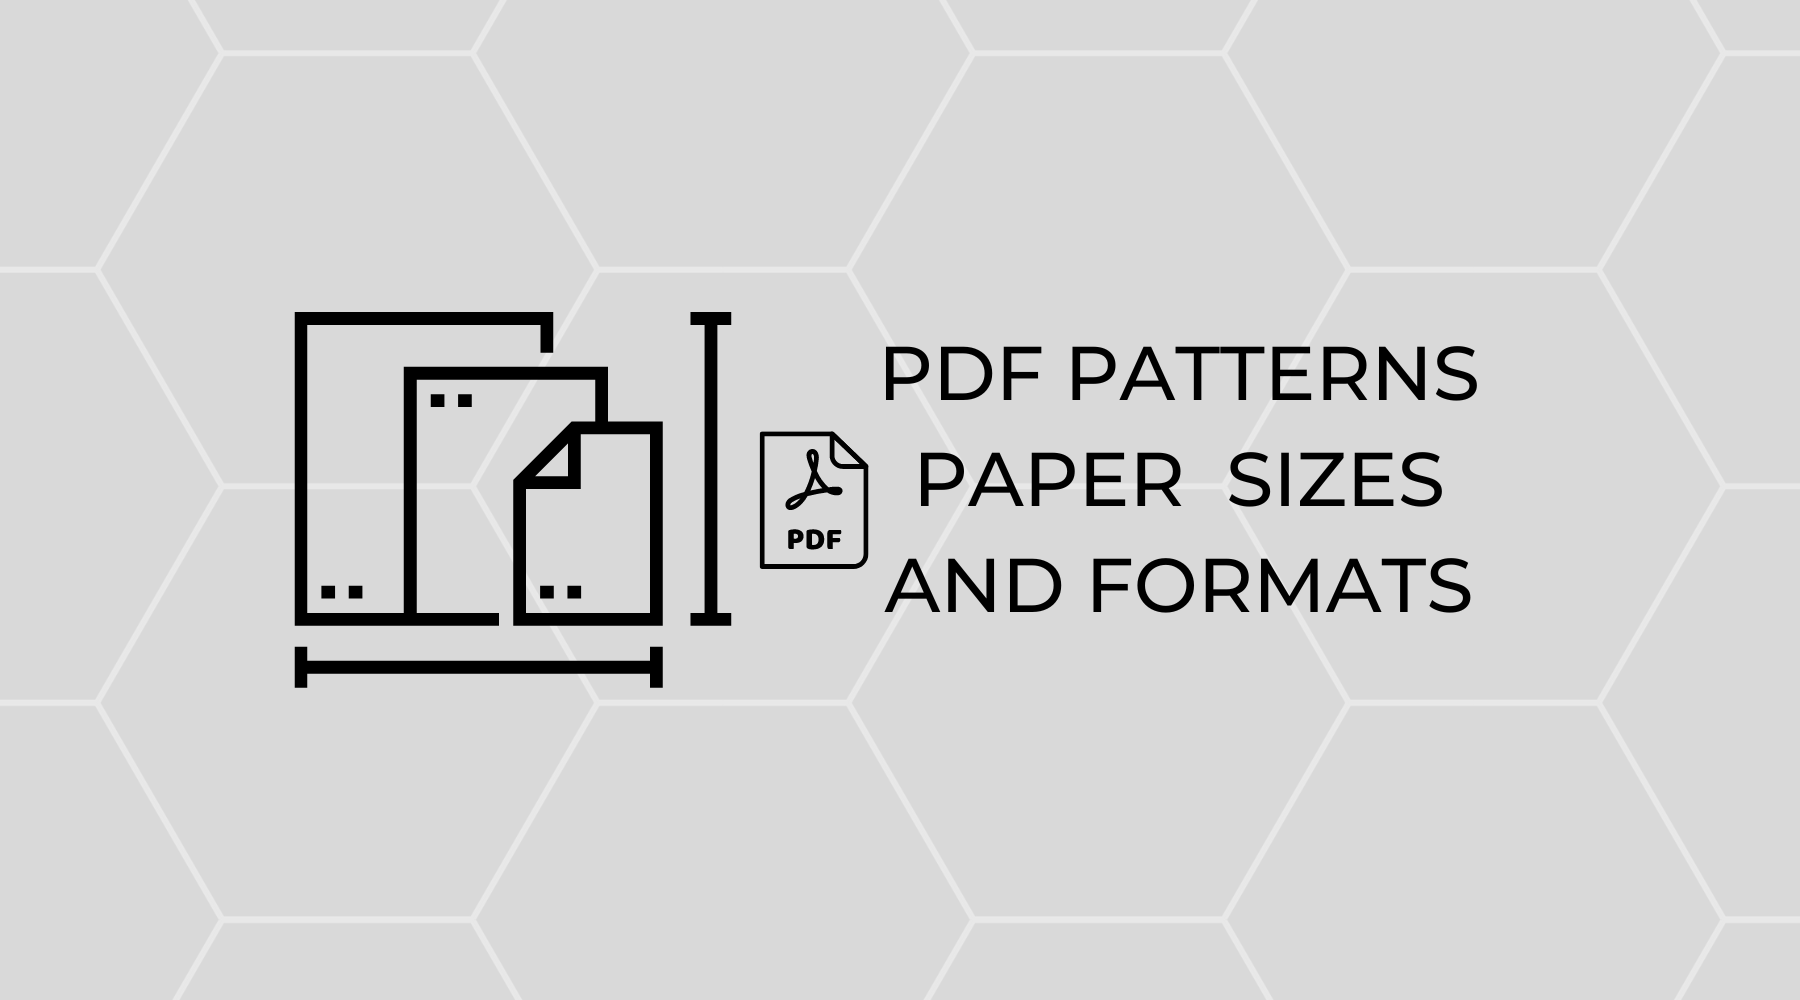 Paper sizes and formats